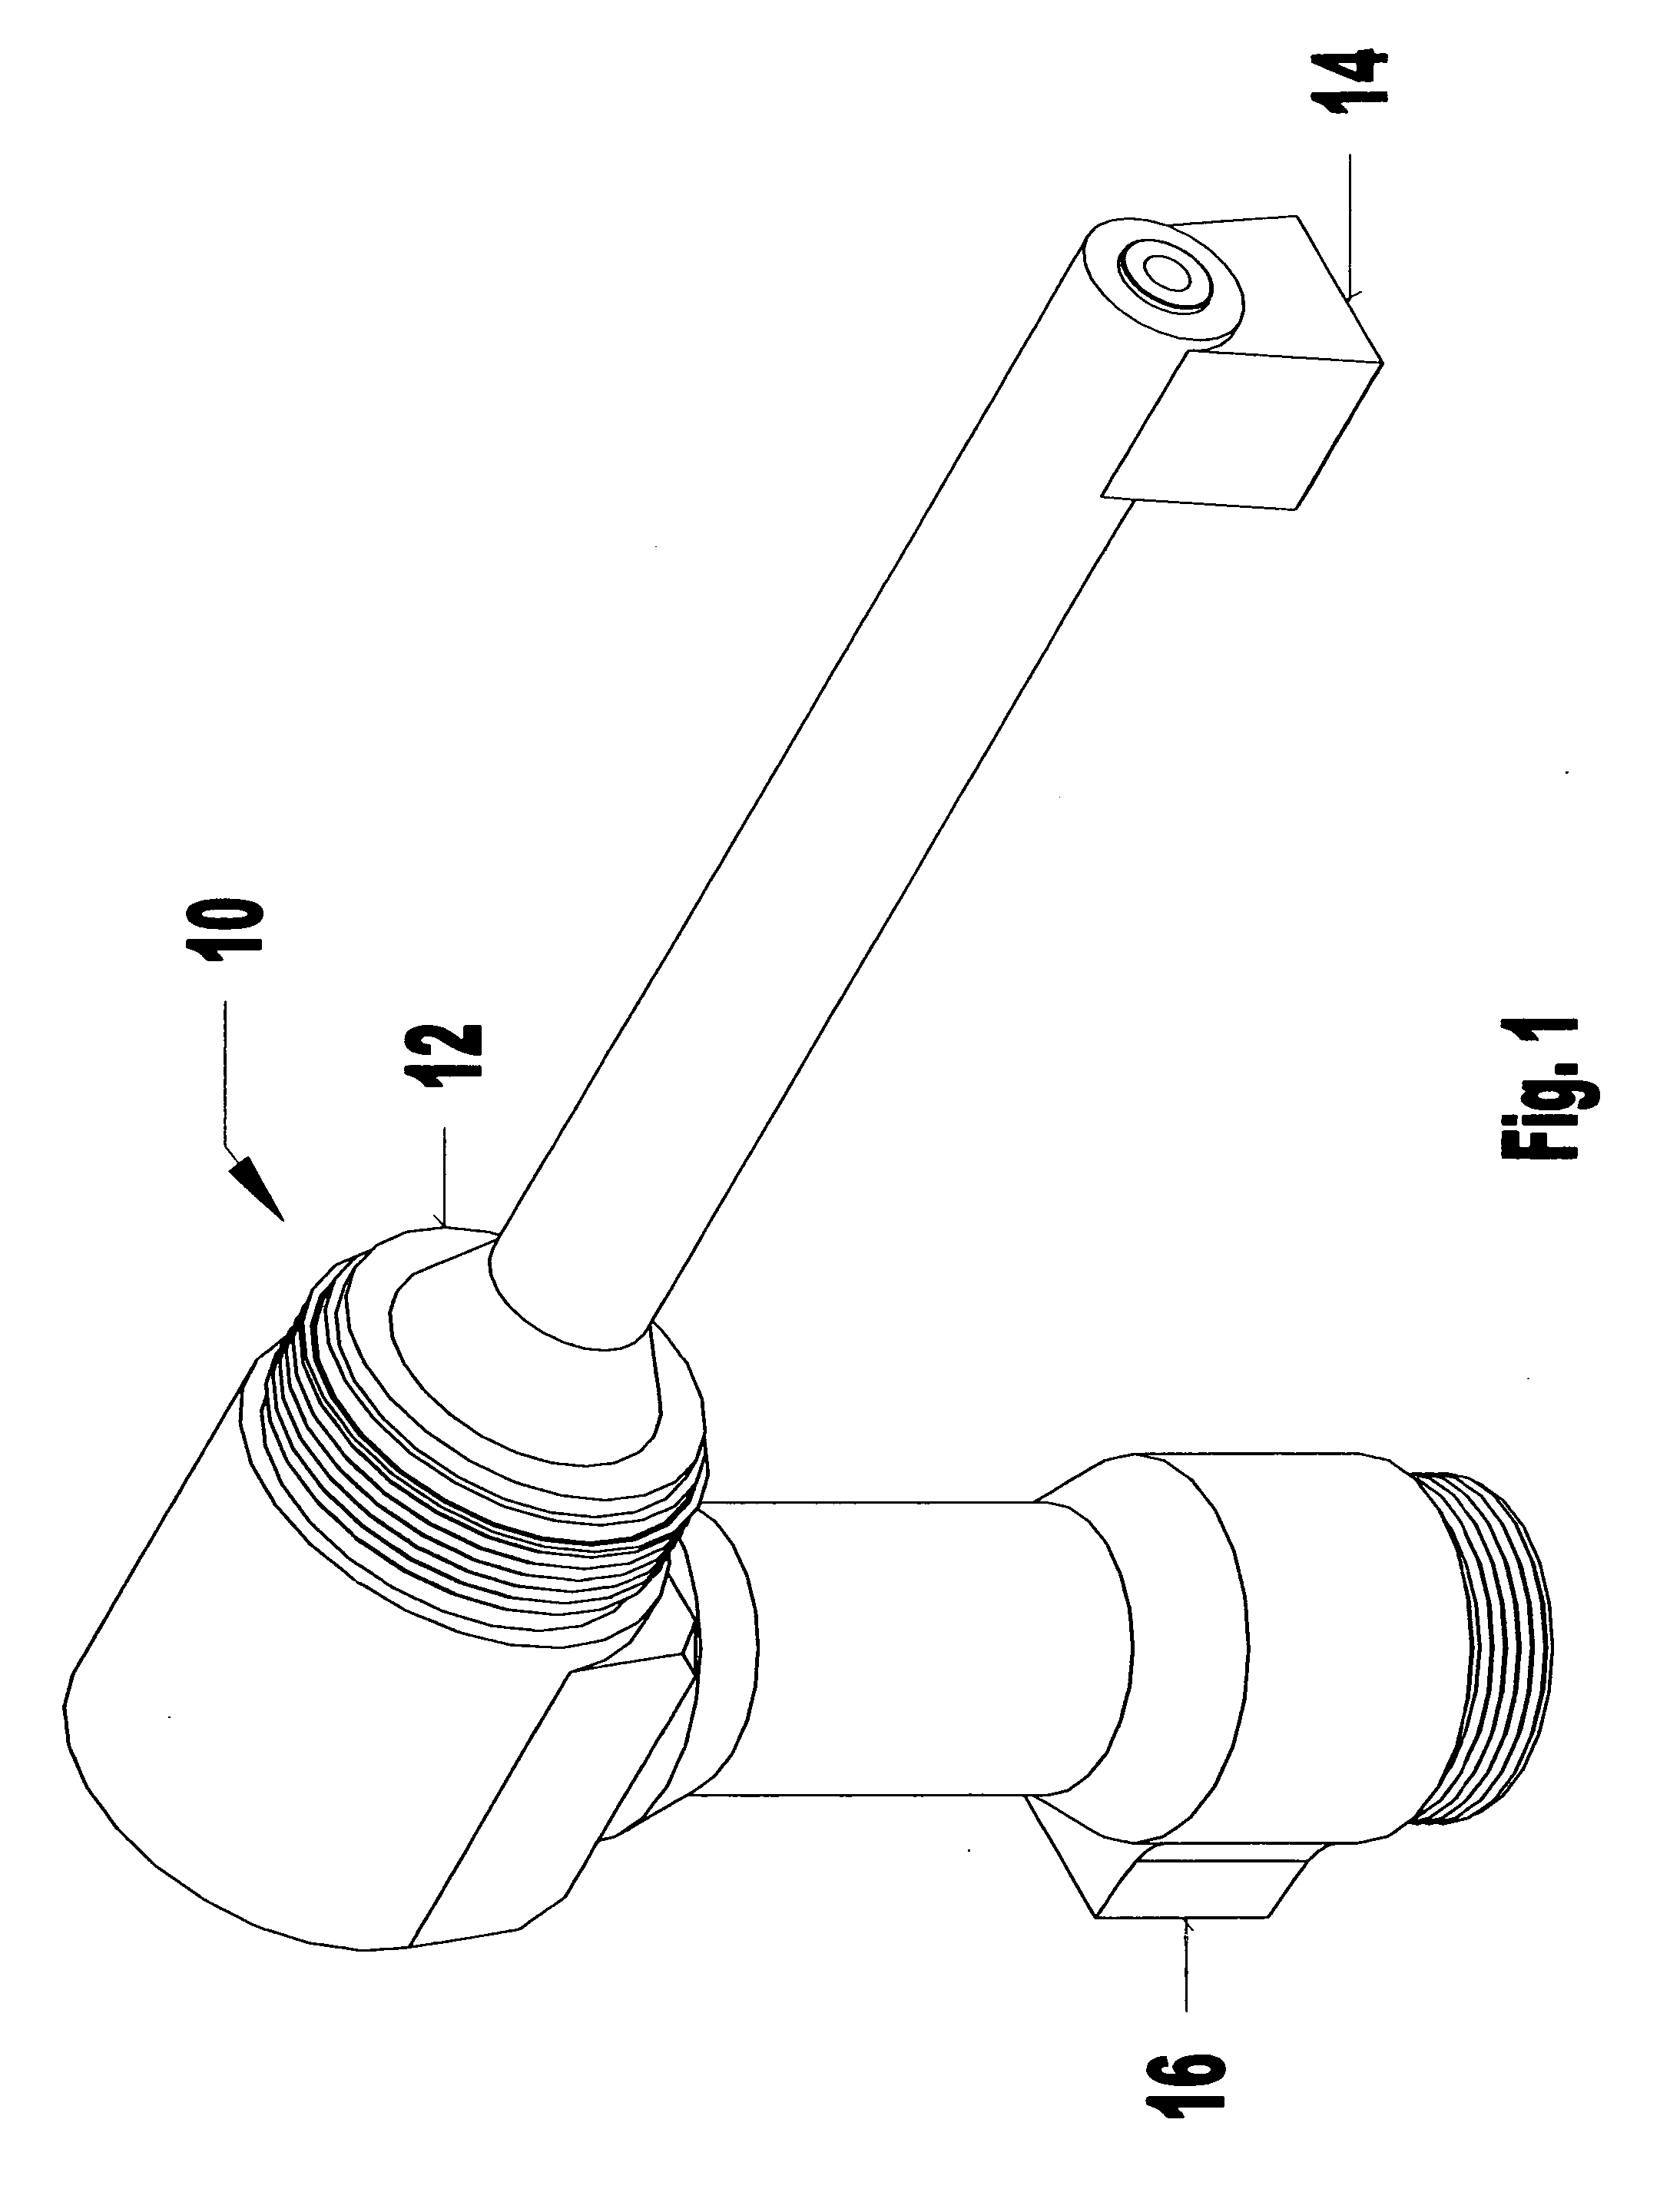 Combustion head for use with a flame spray apparatus